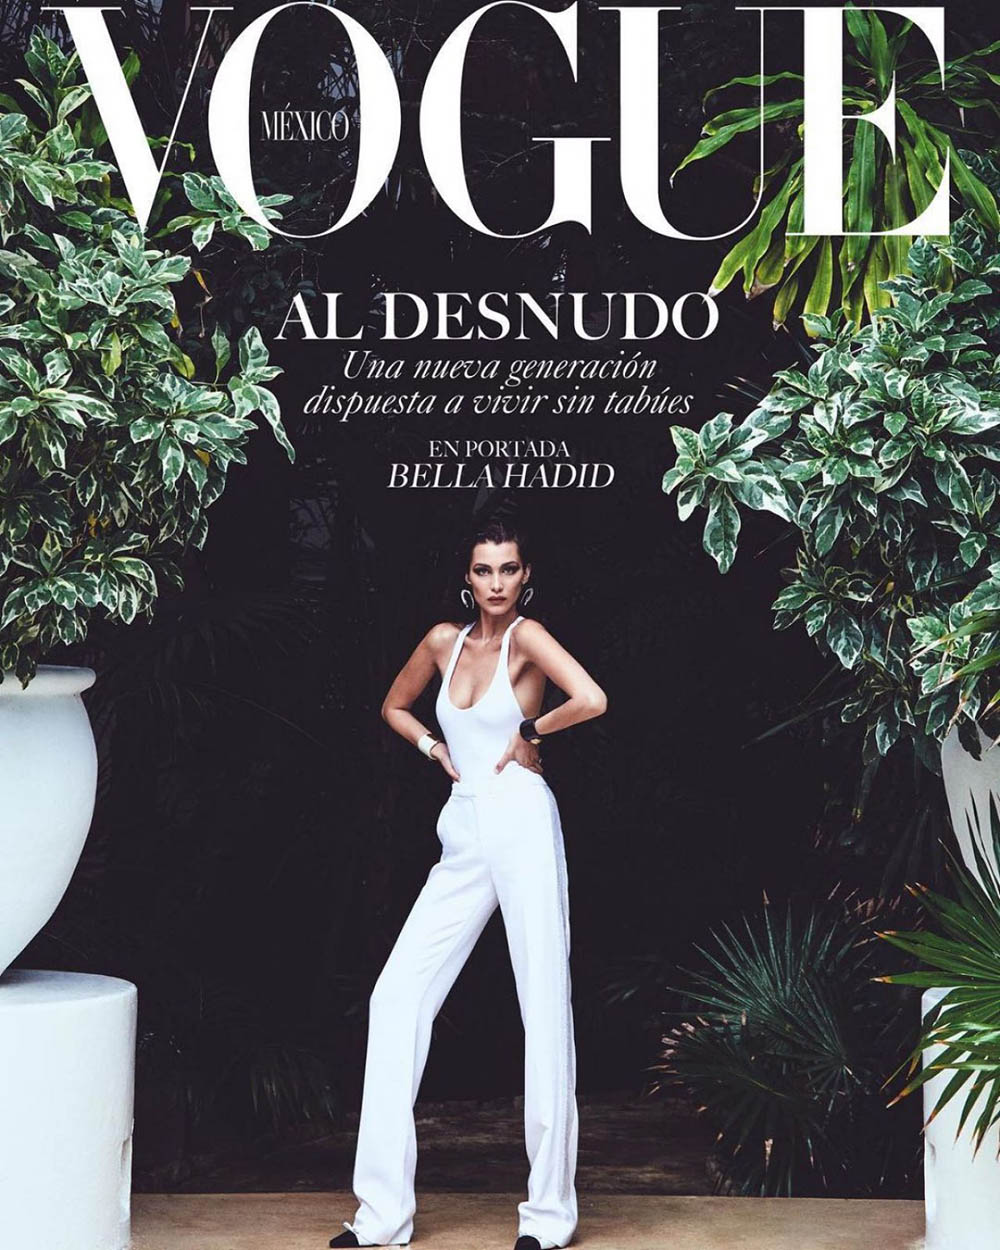 Bella Hadid covers Vogue Mexico July 2018 by Chris Colls